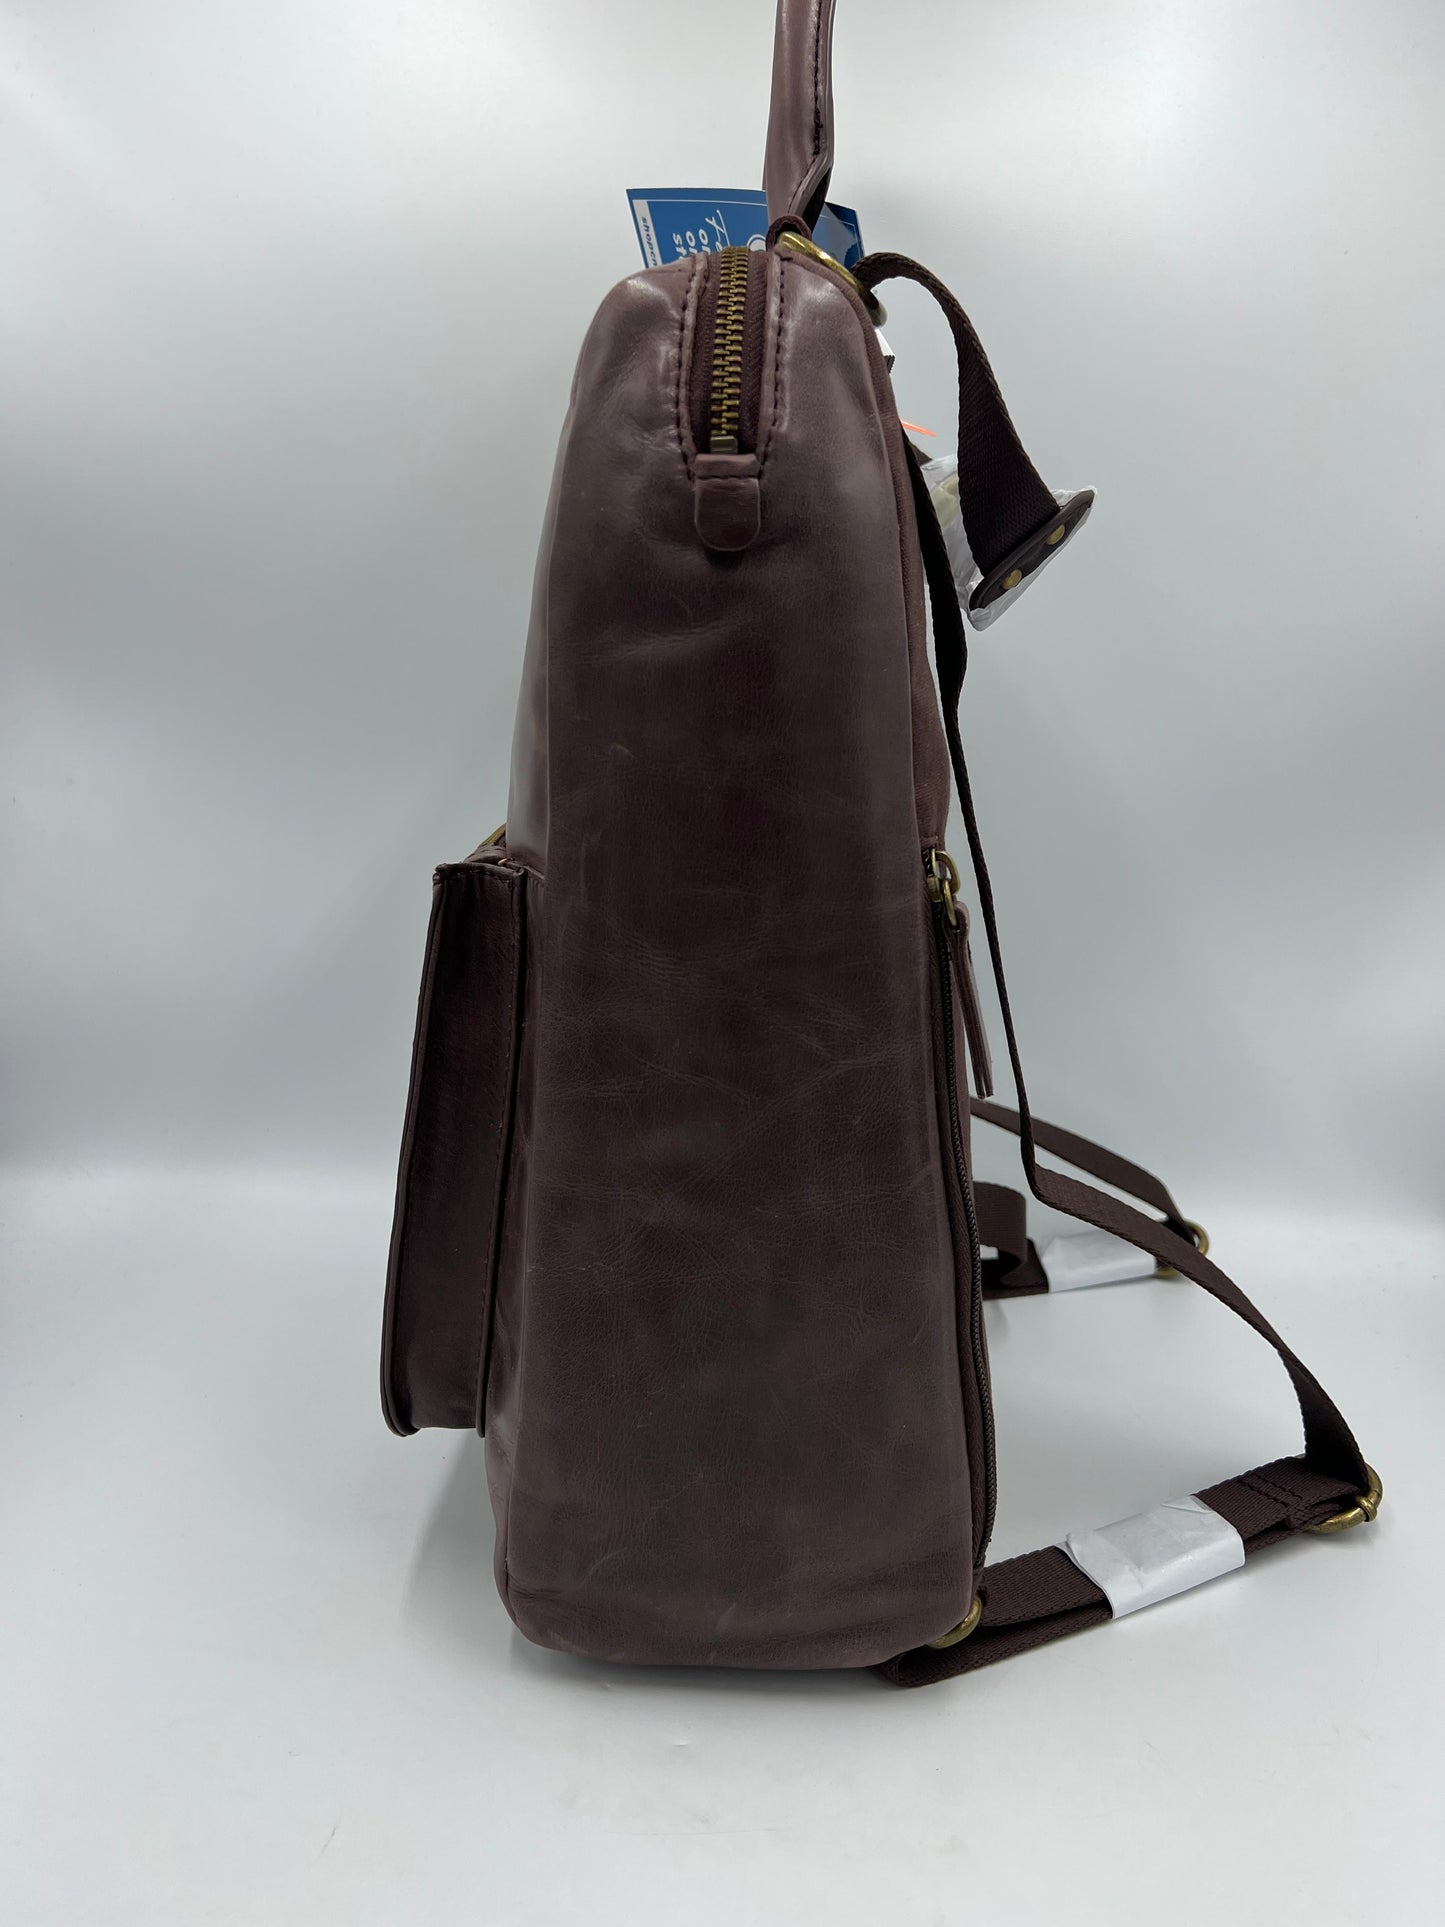 NEW! Backpack By The Sak